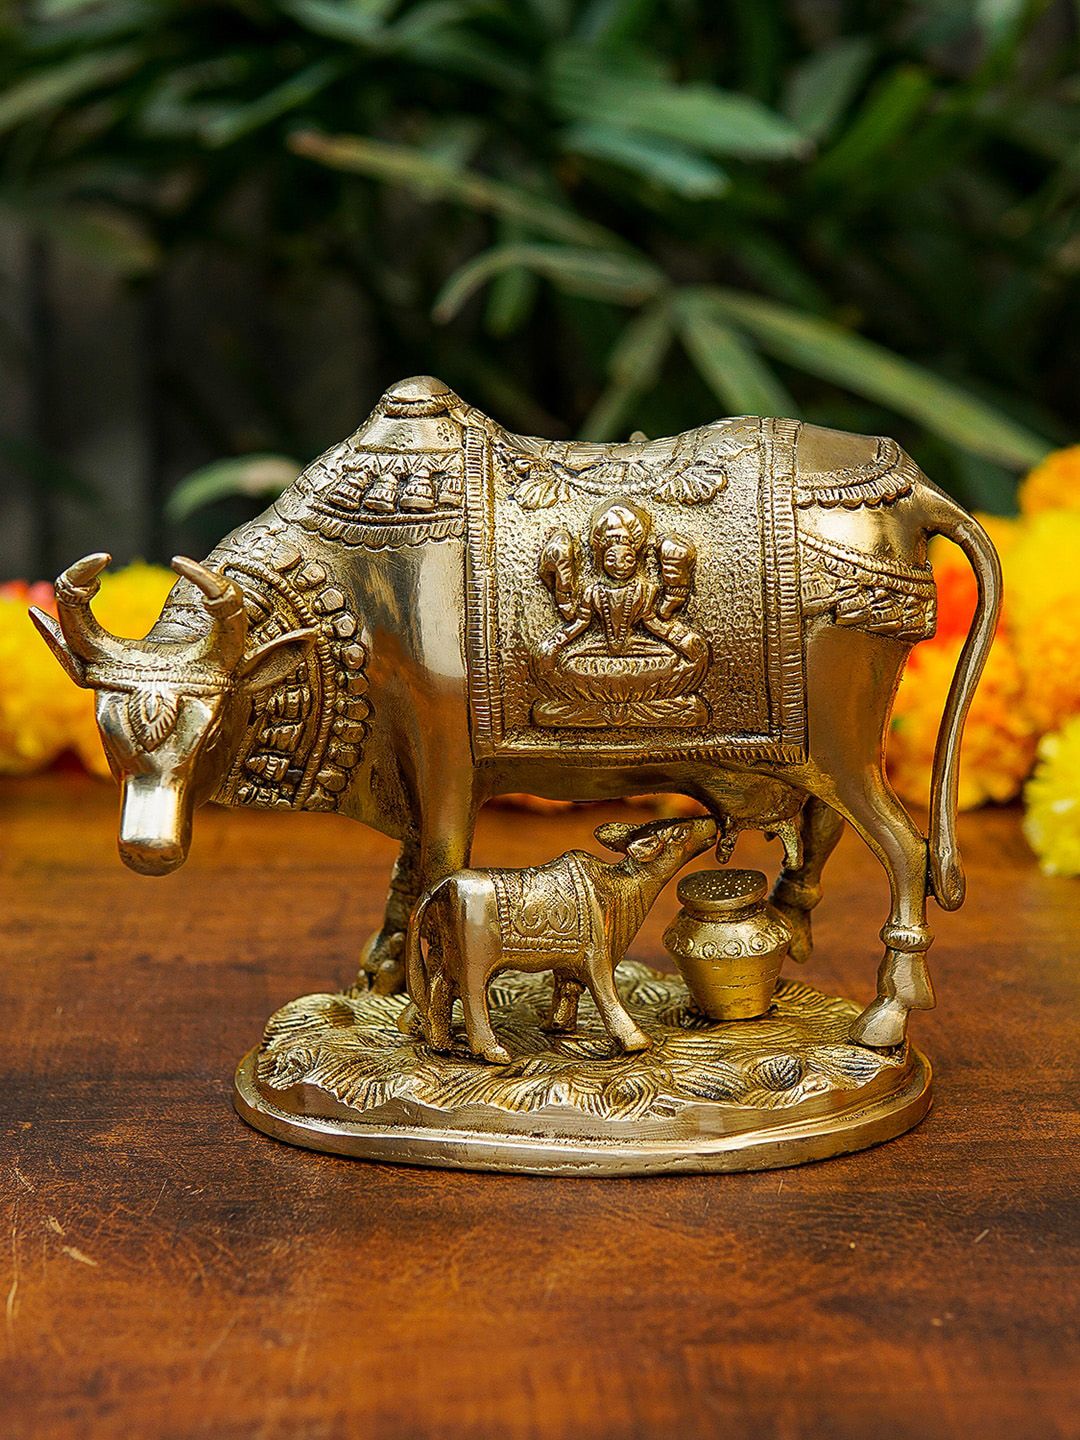 StatueStudio Gold Toned Cow and Calf Statue With Engraved Laxmi Idol Showpiece Price in India